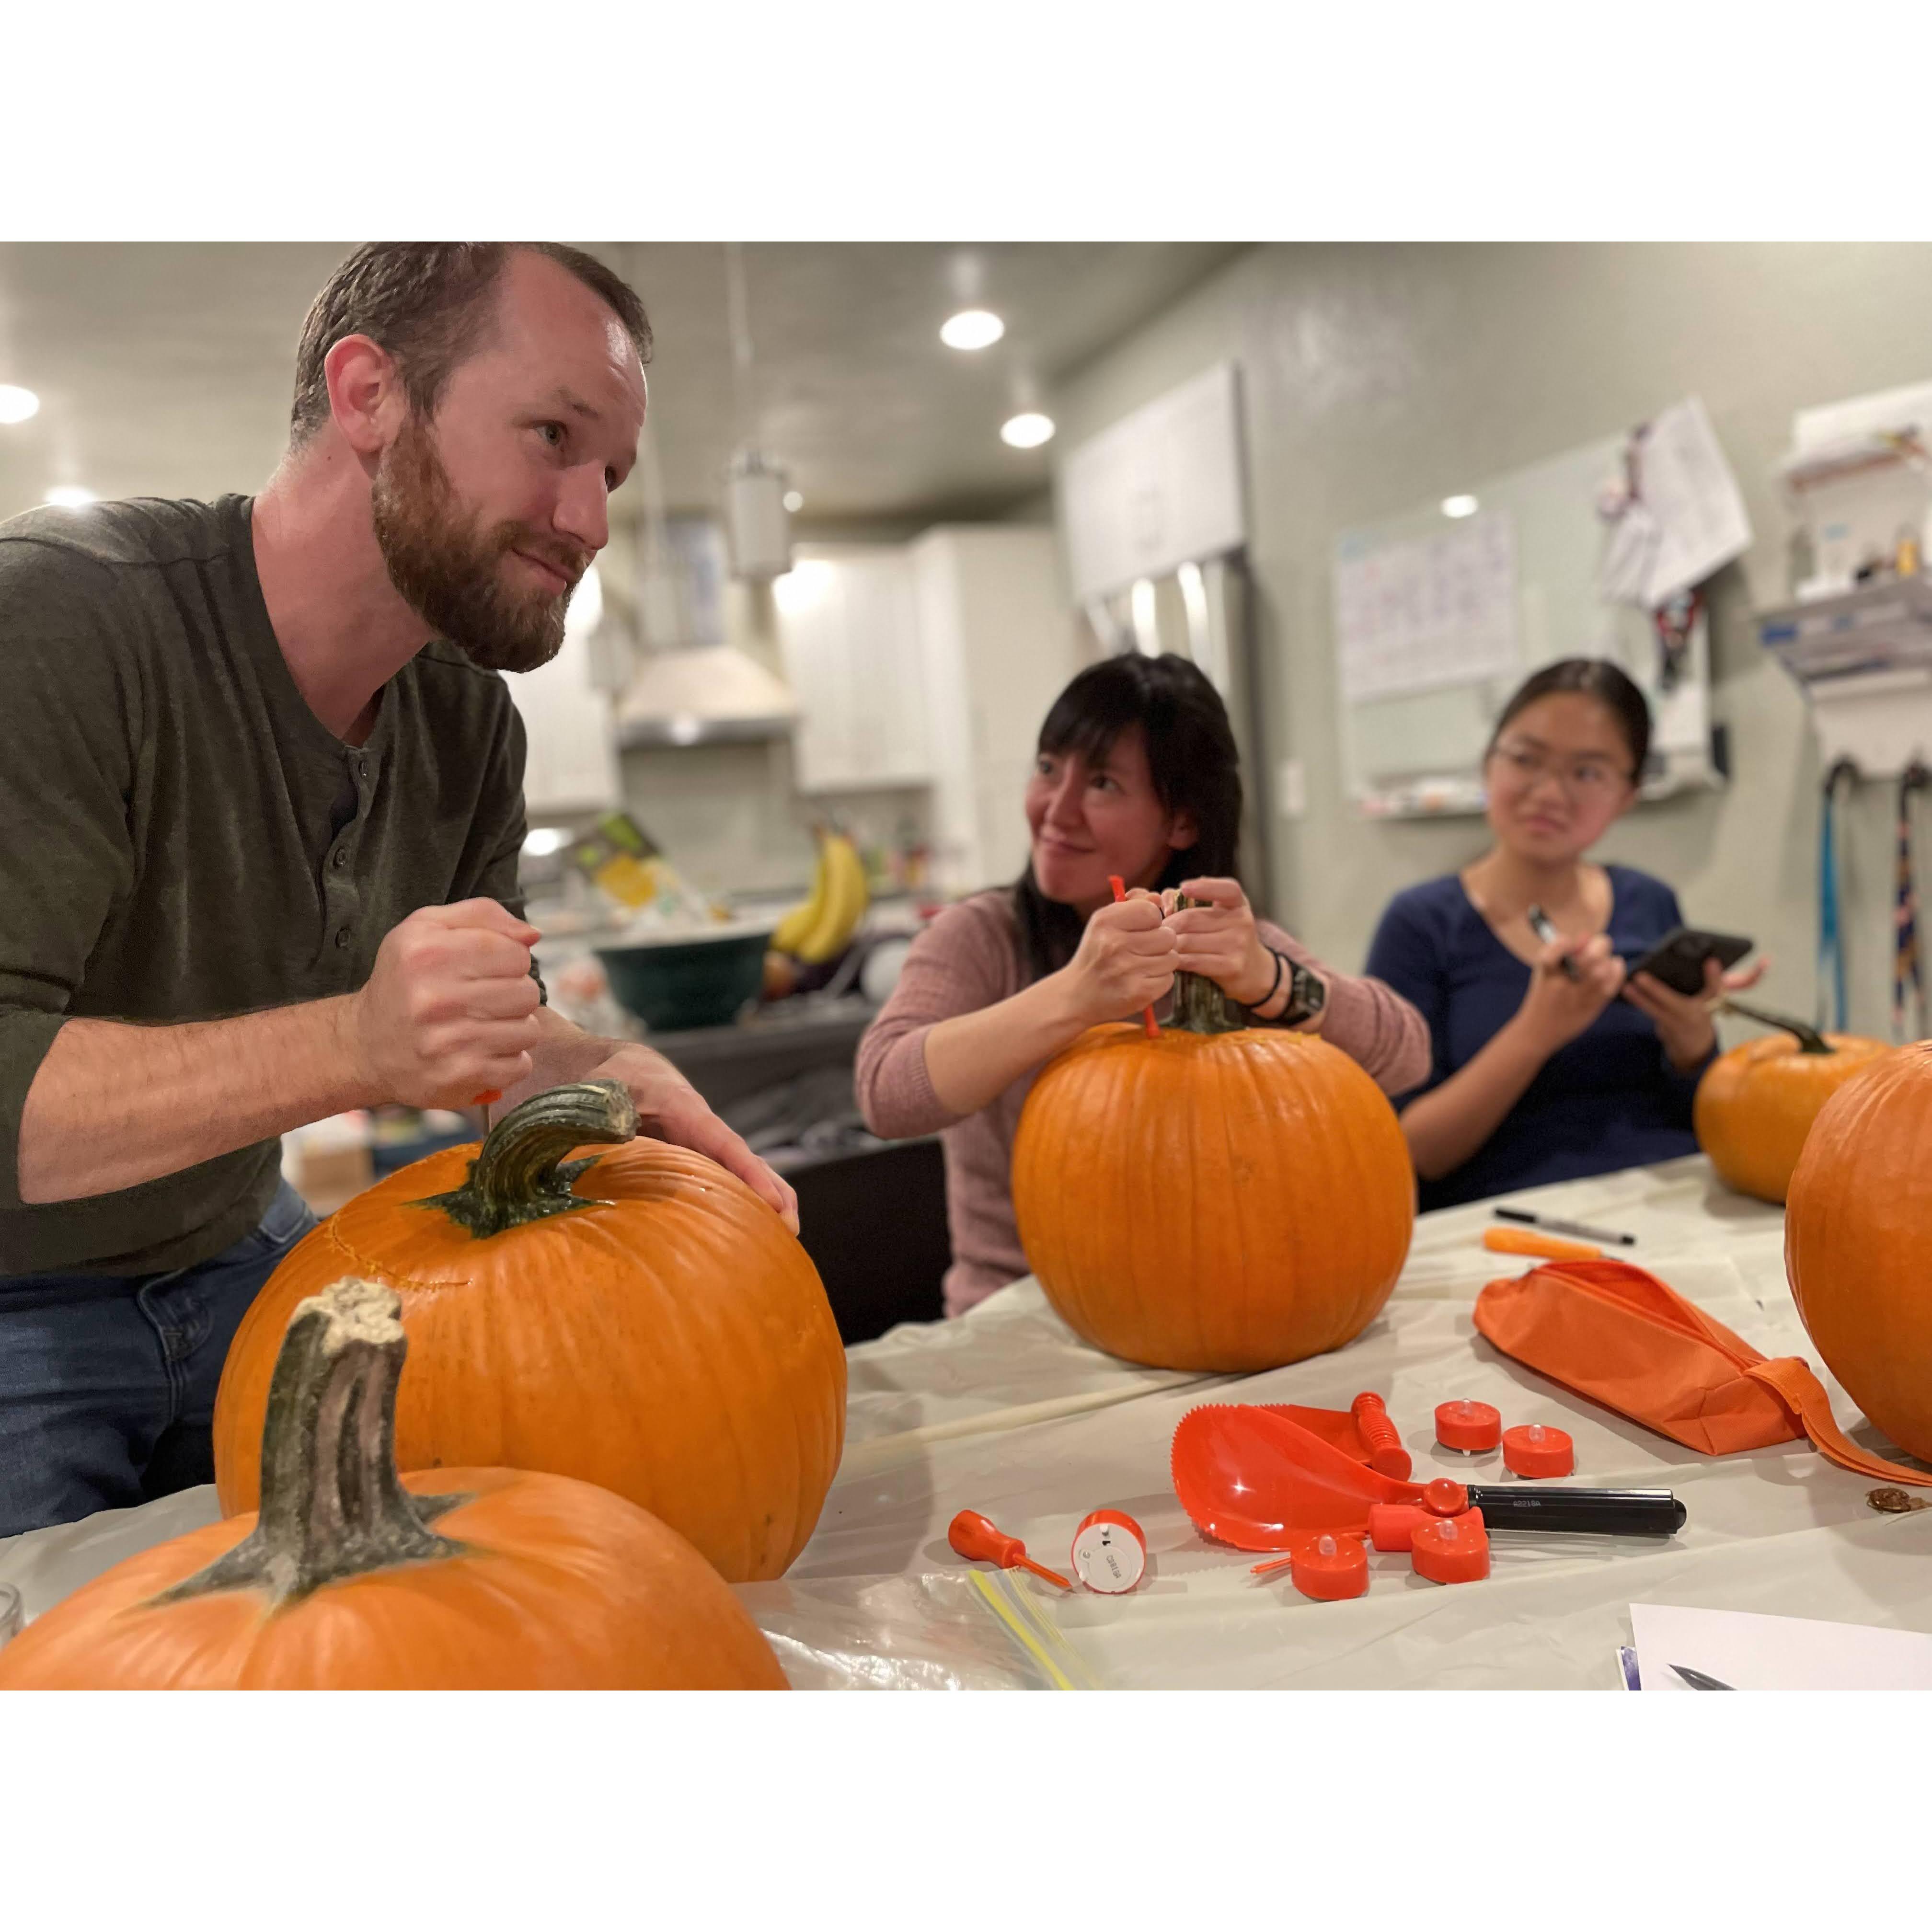 Competitive pumpkin carving